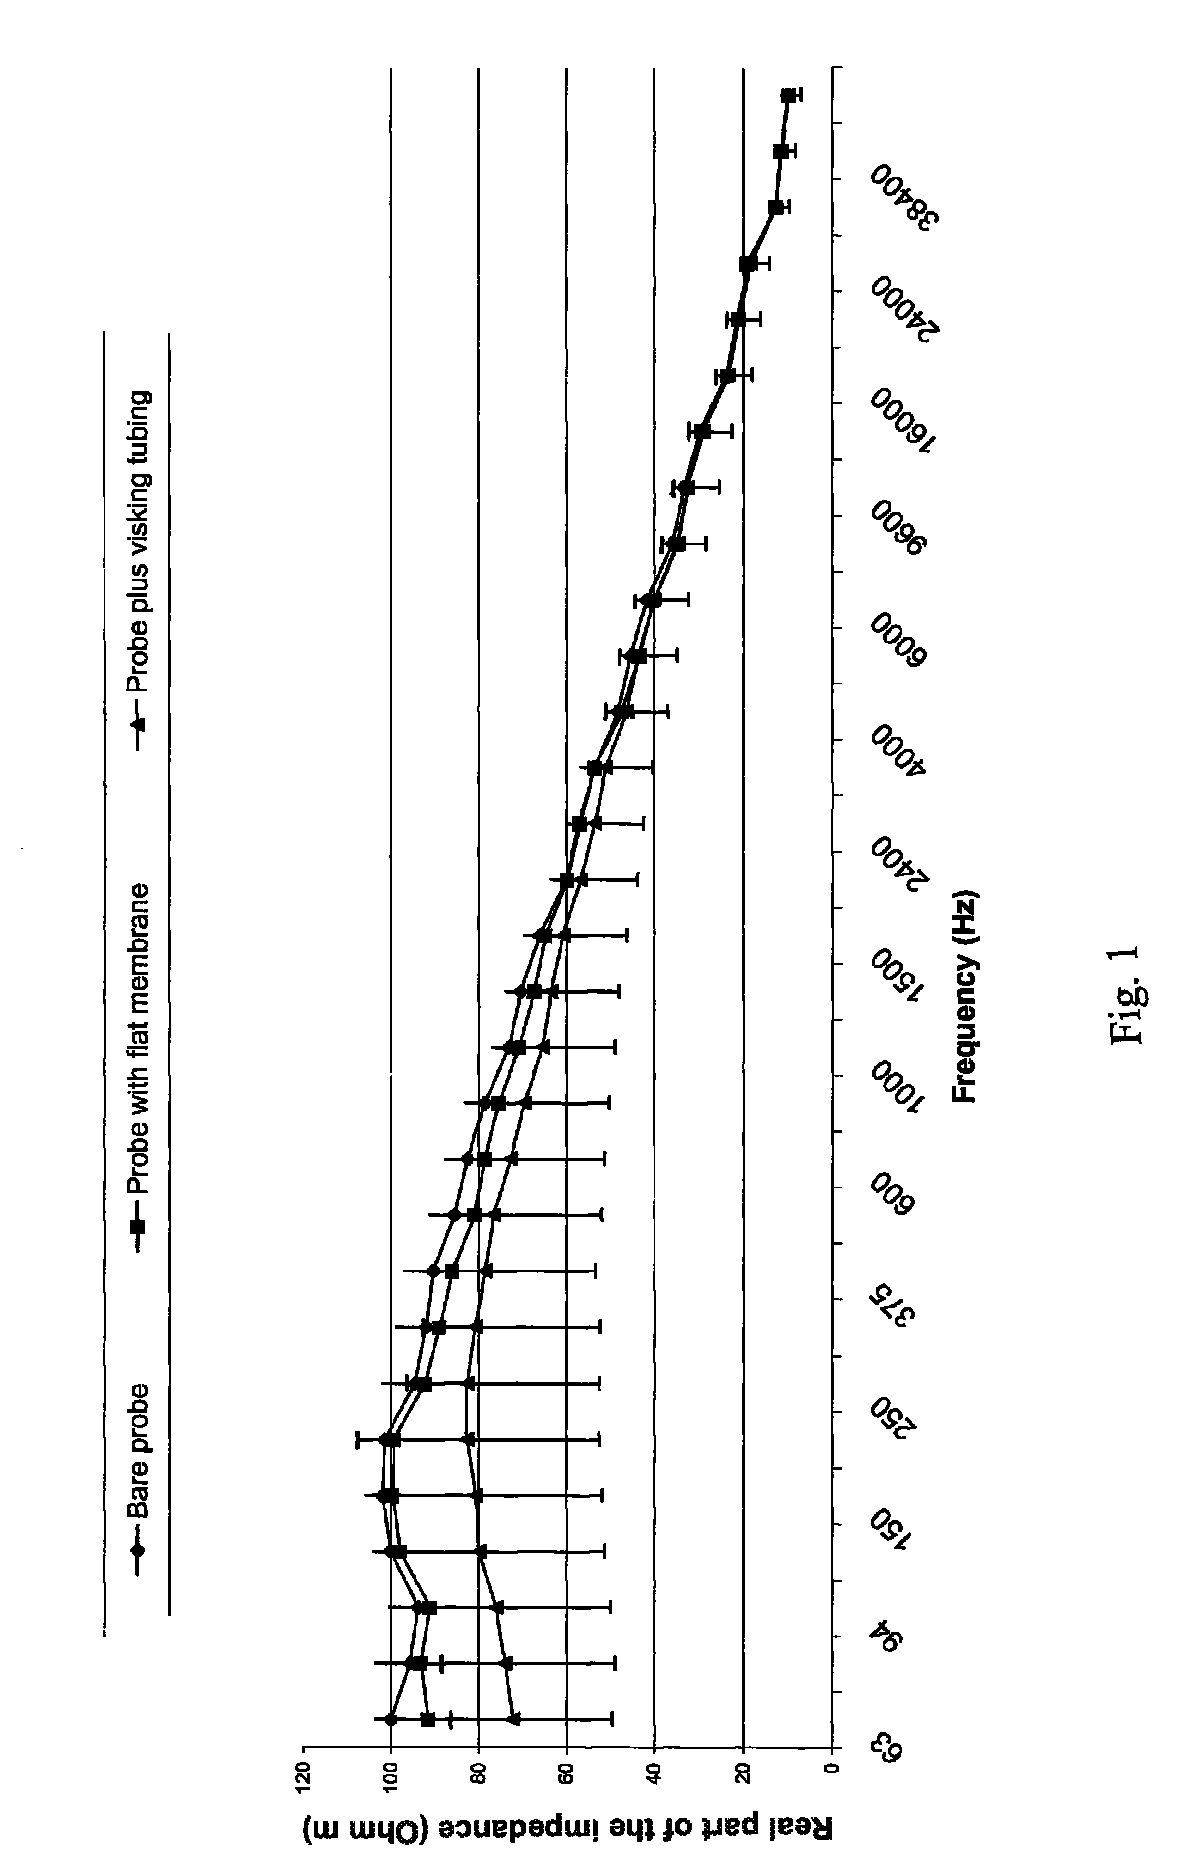 Apparatus for measuring tissue samples electrical impedance